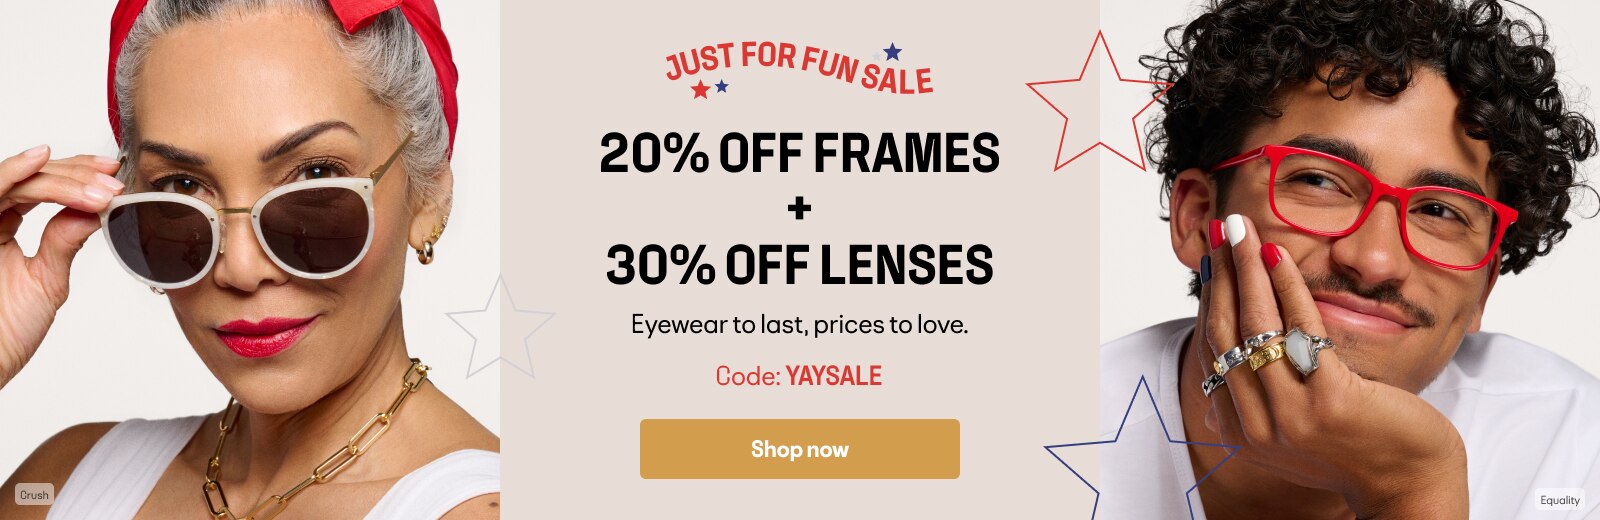 20% Off Frames 30% Off Lenses Code: YAYSALE Eyewear to last, prices to love.